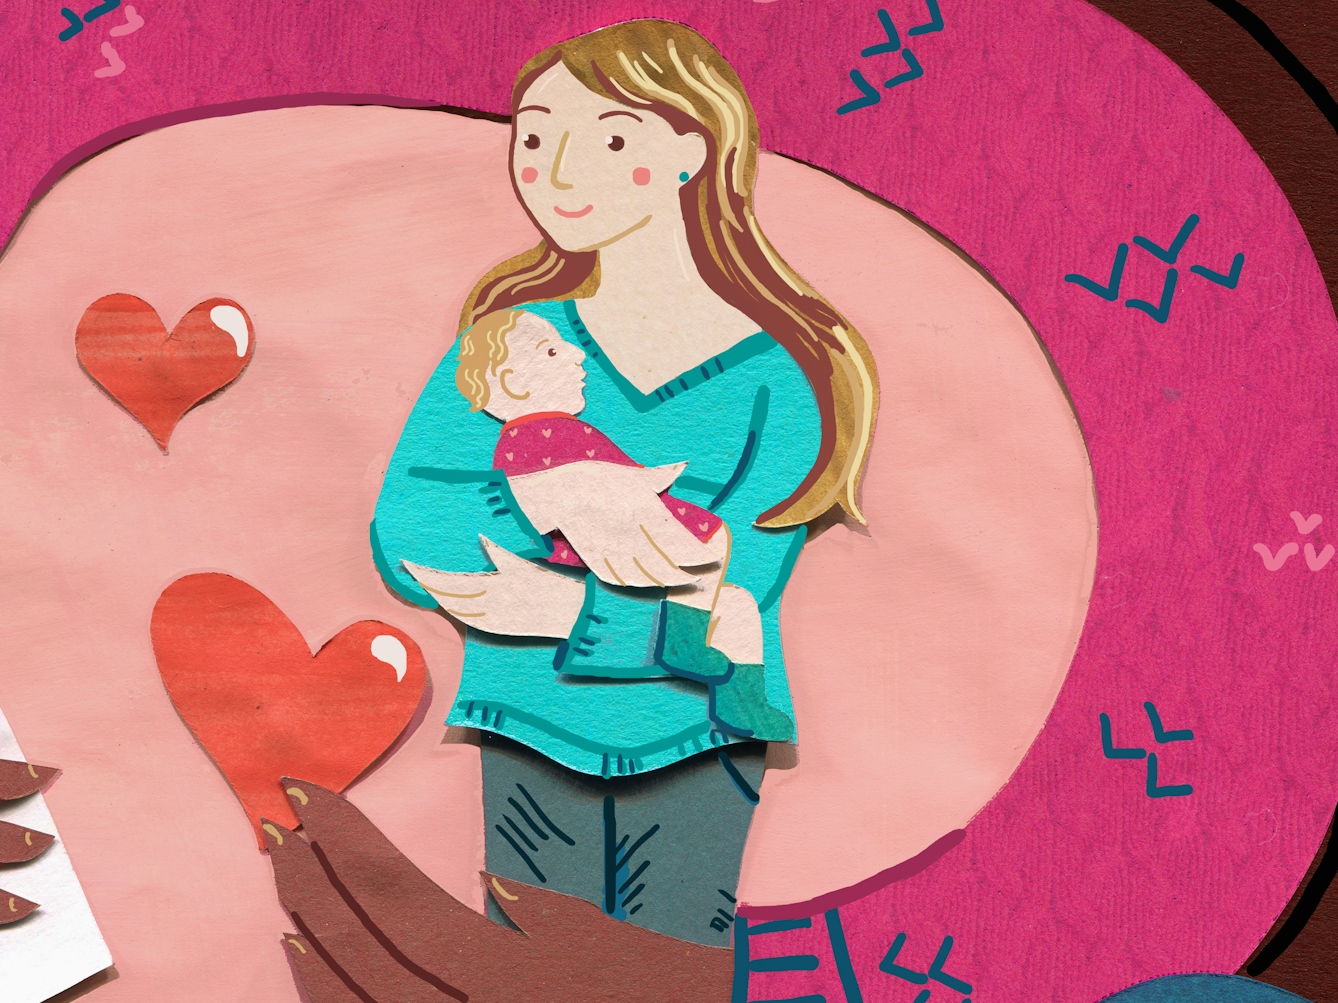 A mixed media illustration depicting a white mother carrying a child. She is being embraced by an arm, with the hand holding a red love heart.